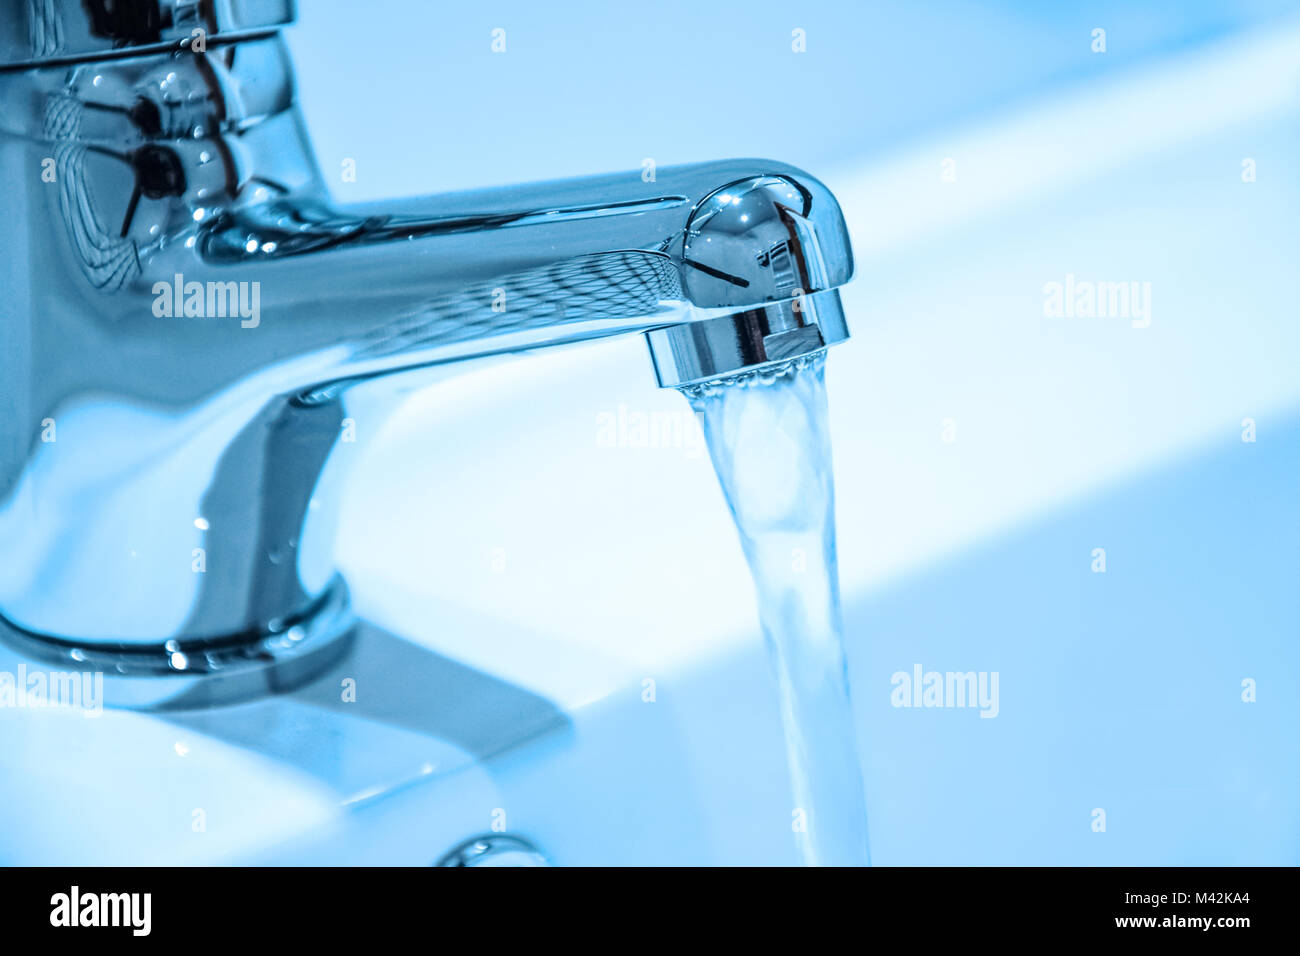 Water running from an open faucet in close-up (blue filter effect). Stock Photo